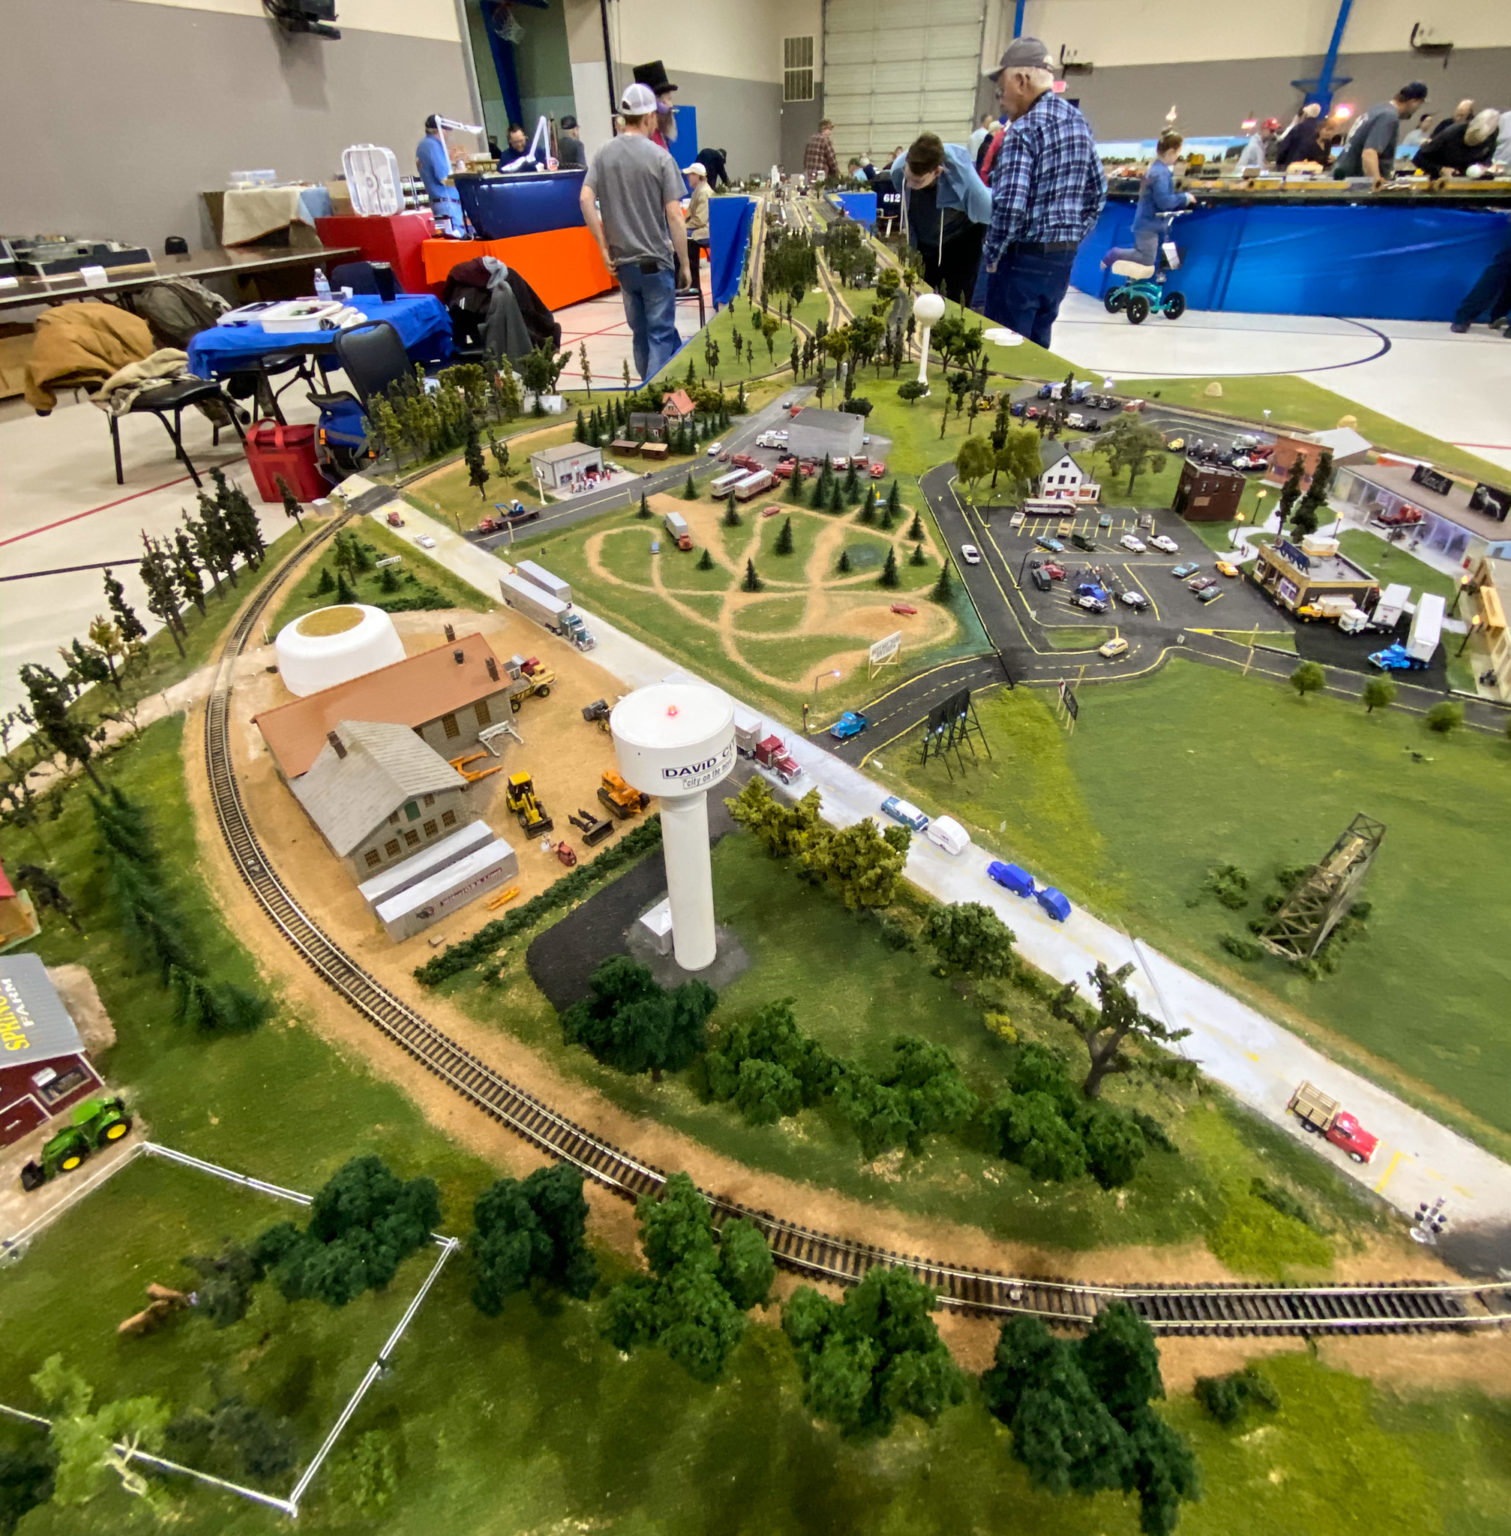 Wichita Train Show Track Layout Photos All the Pages Are My Days